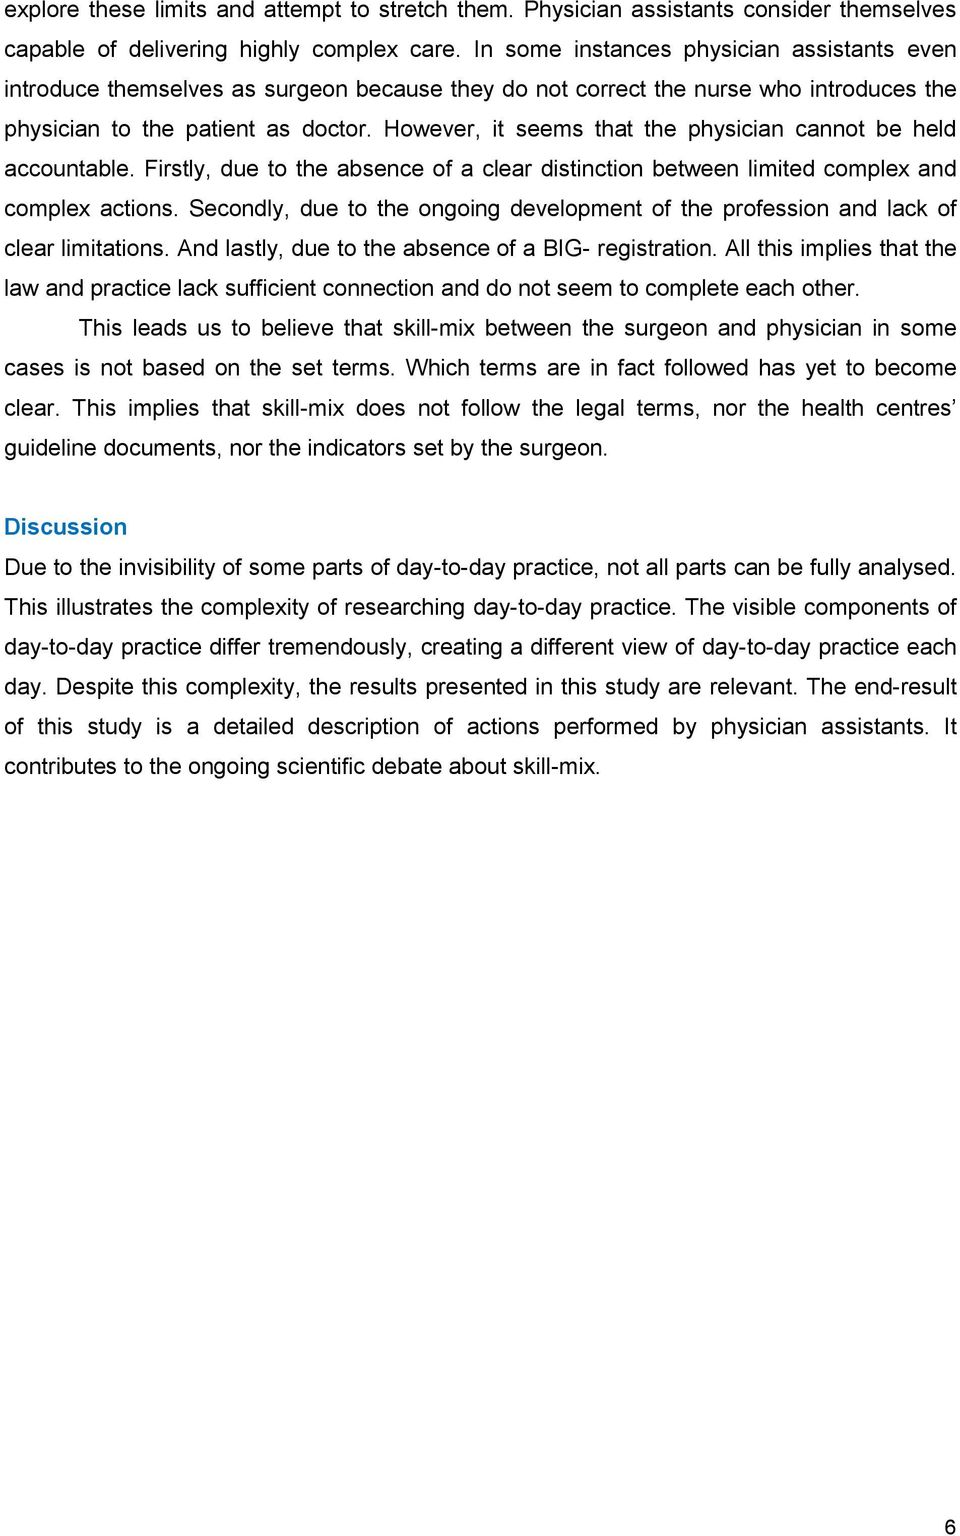 However, it seems that the physician cannot be held accountable. Firstly, due to the absence of a clear distinction between limited complex and complex actions.